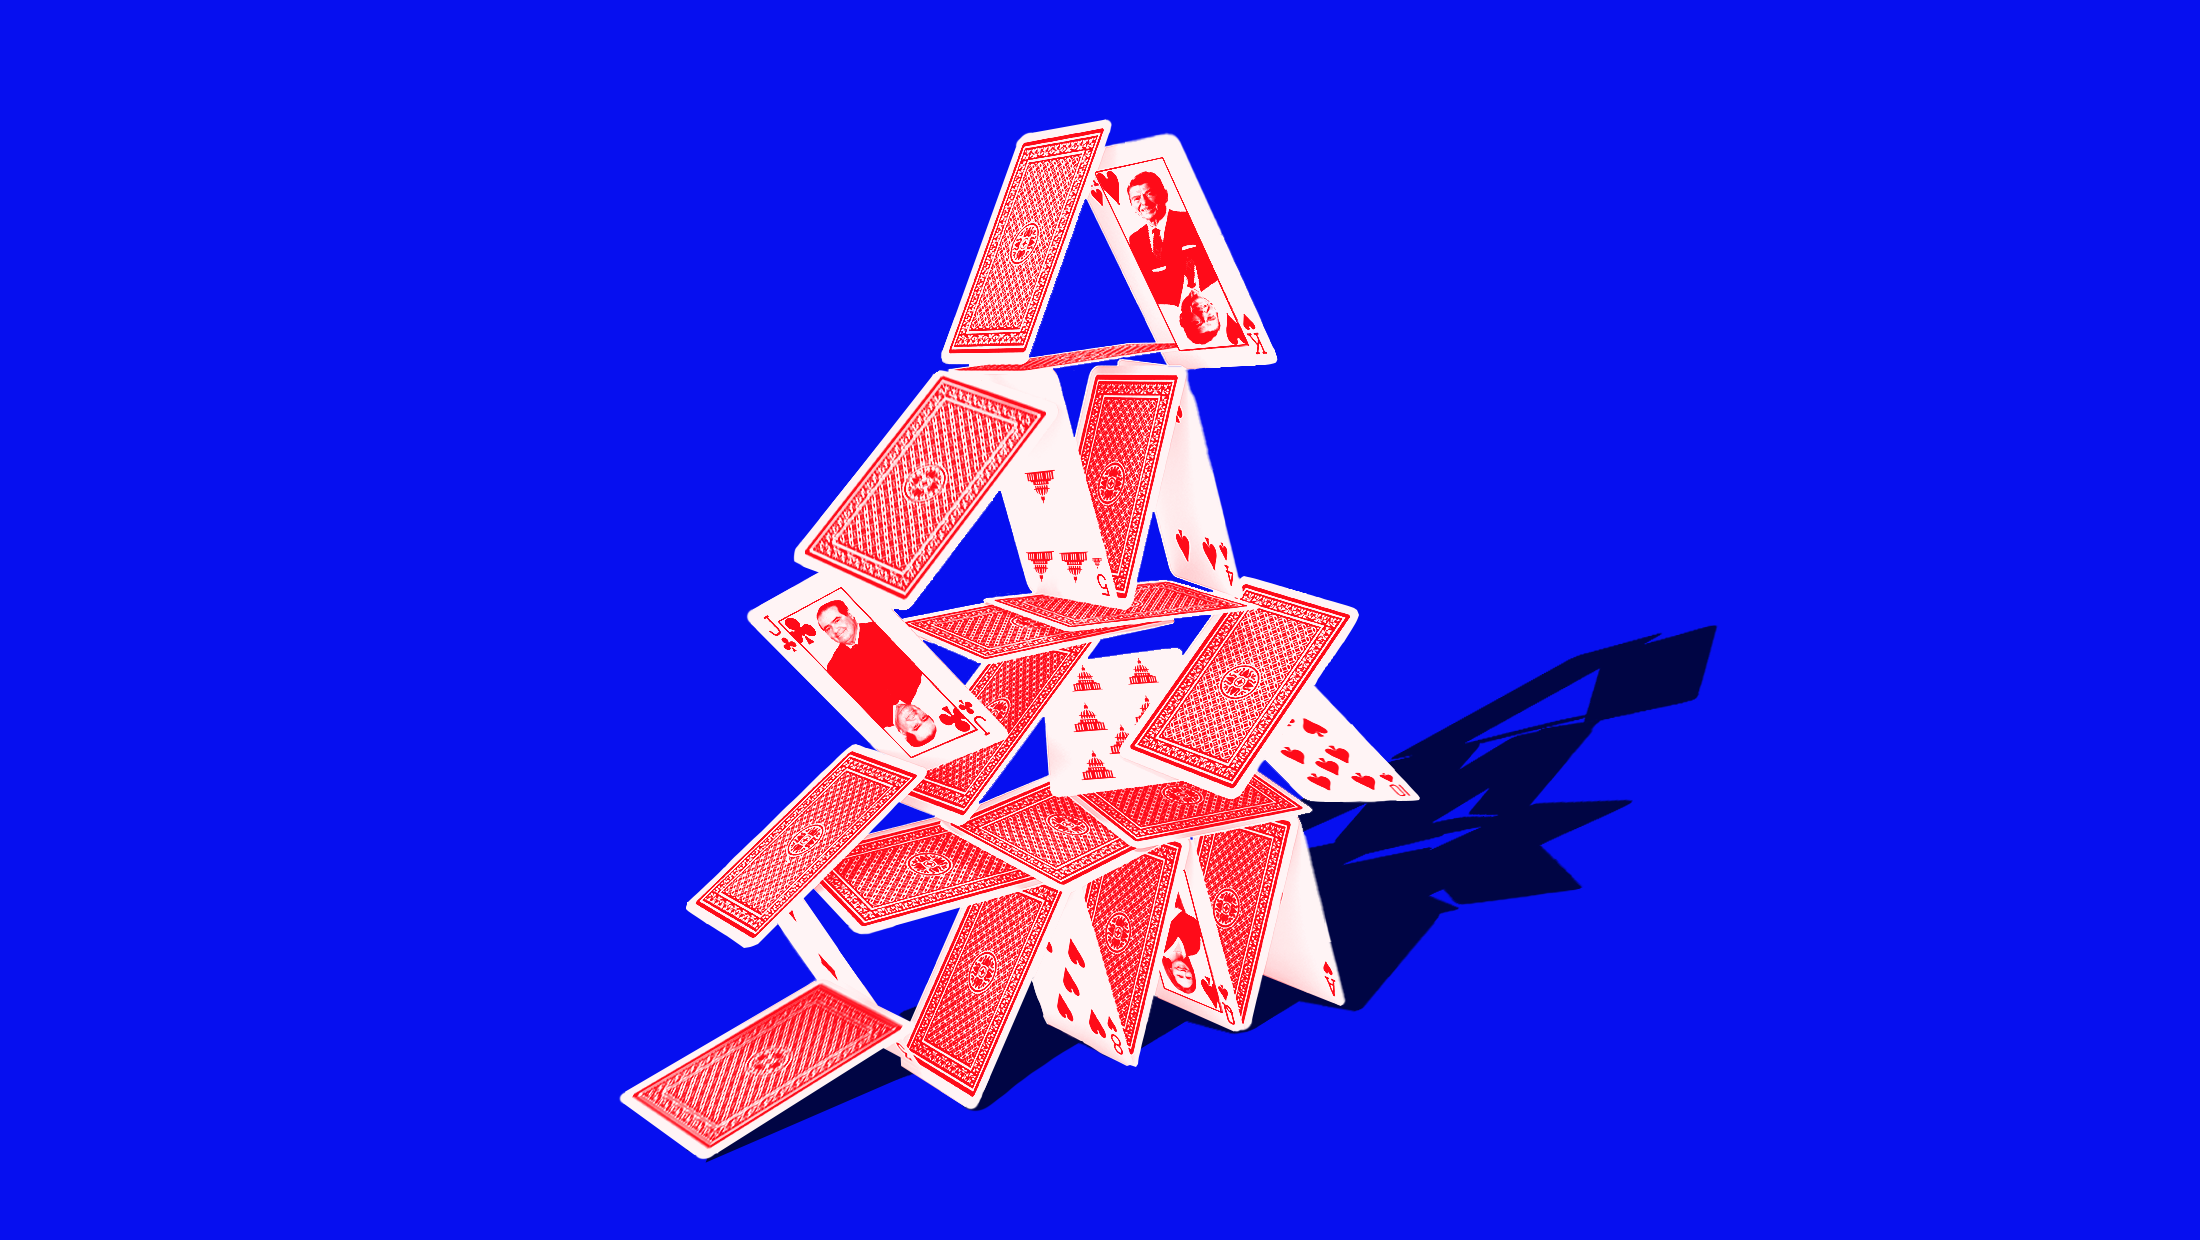 Blue background with red and white cards stacked on top of one another like a house of cards.